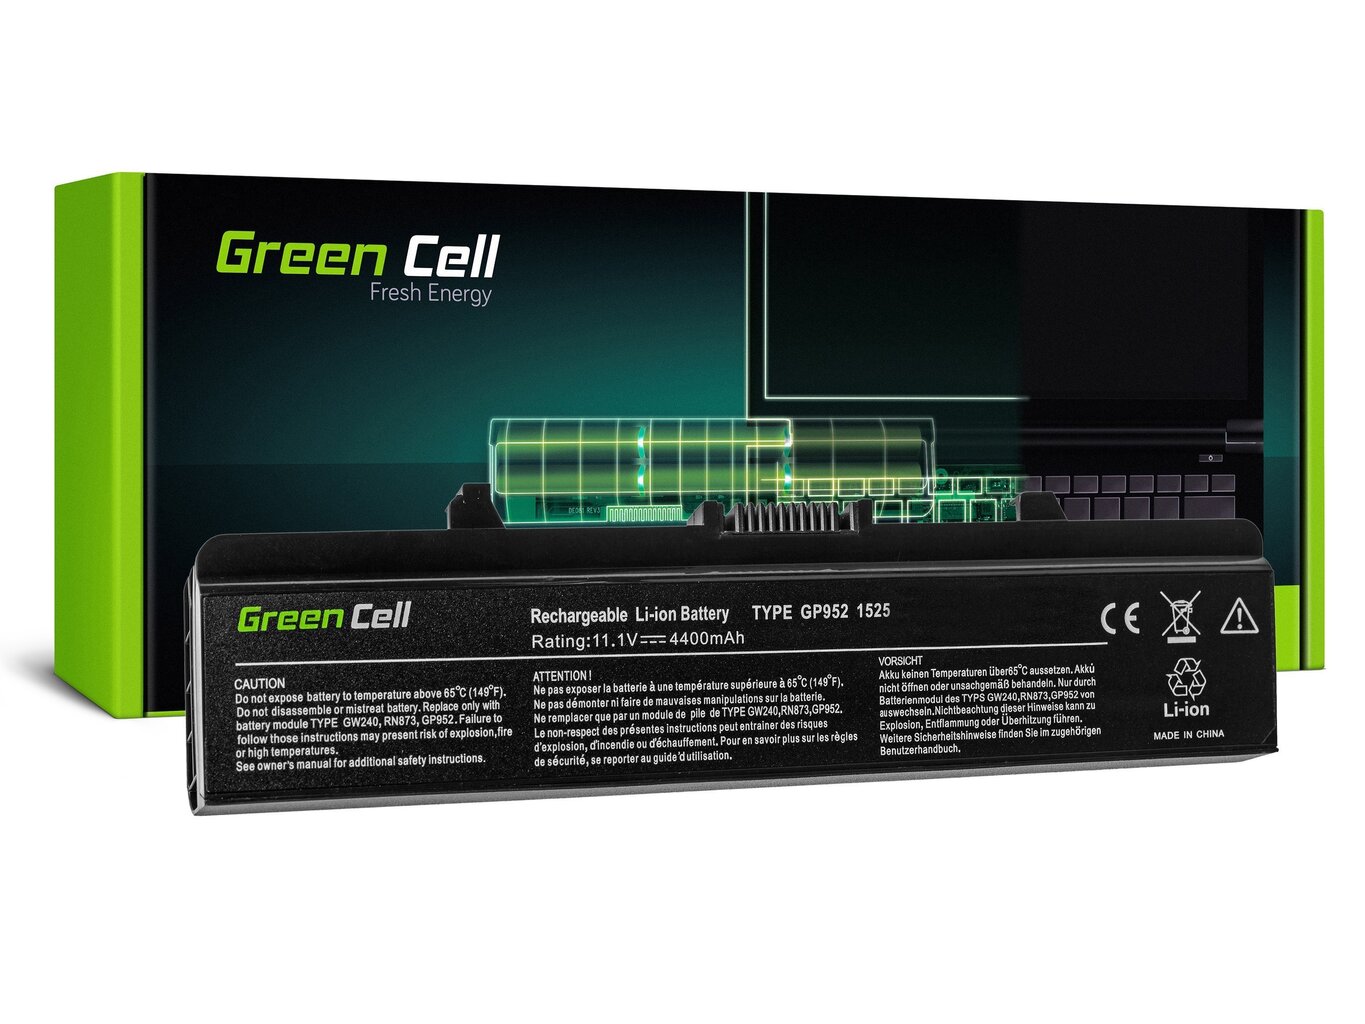 Sülearvuti aku Green Cell Laptop Battery for Dell Inspiron 1525 1526 1545 1546 PP29L PP41L Vostro 500 hind ja info | Sülearvuti akud | kaup24.ee